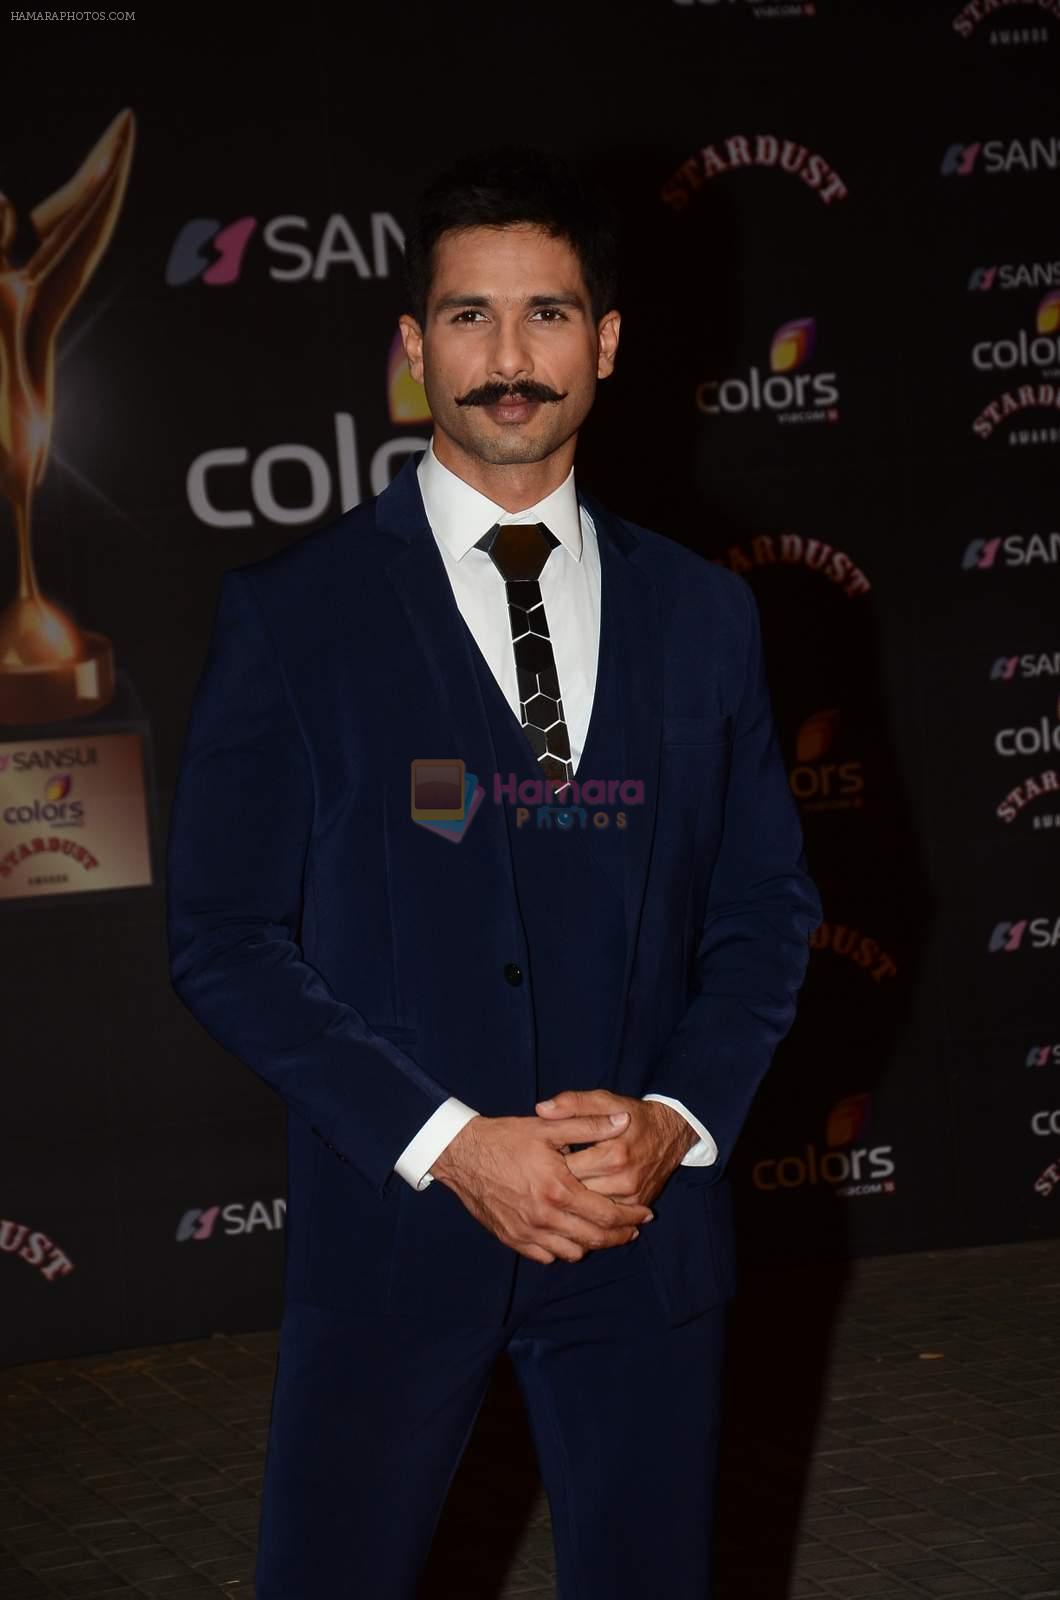 Shahid Kapoor at the red carpet of Stardust awards on 21st Dec 2015